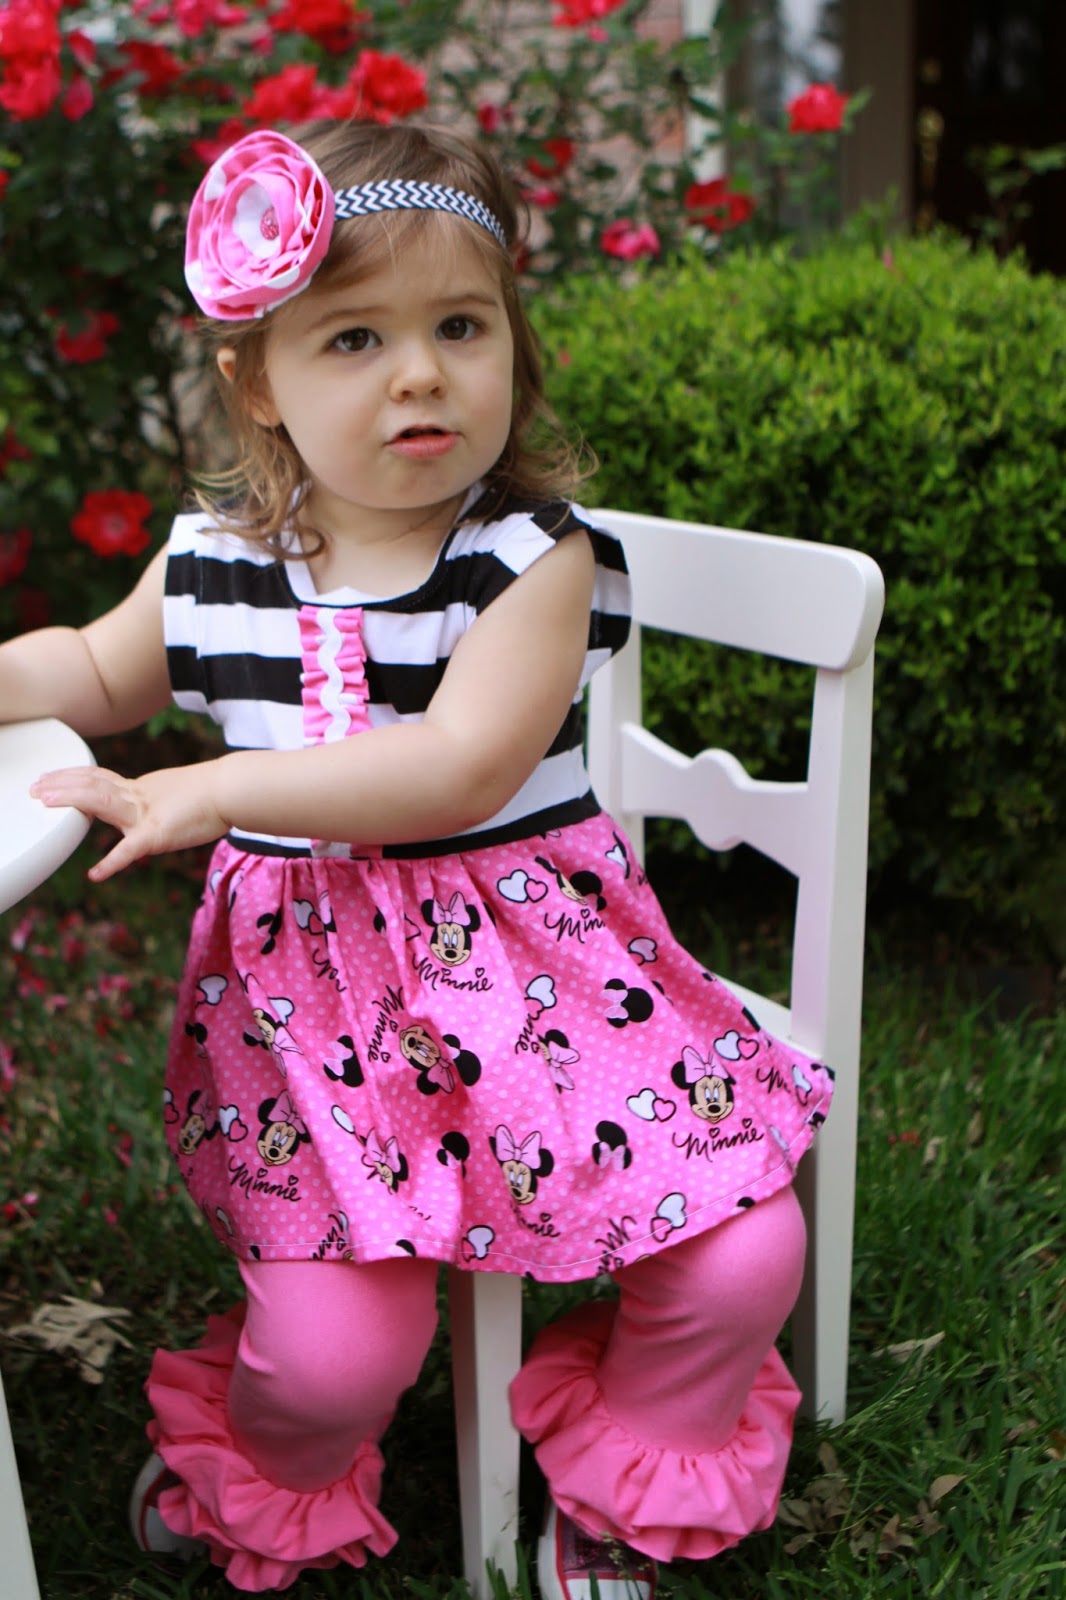 Lillian Kate Custom Clothing: Minnie Mouse Birthday Outfit